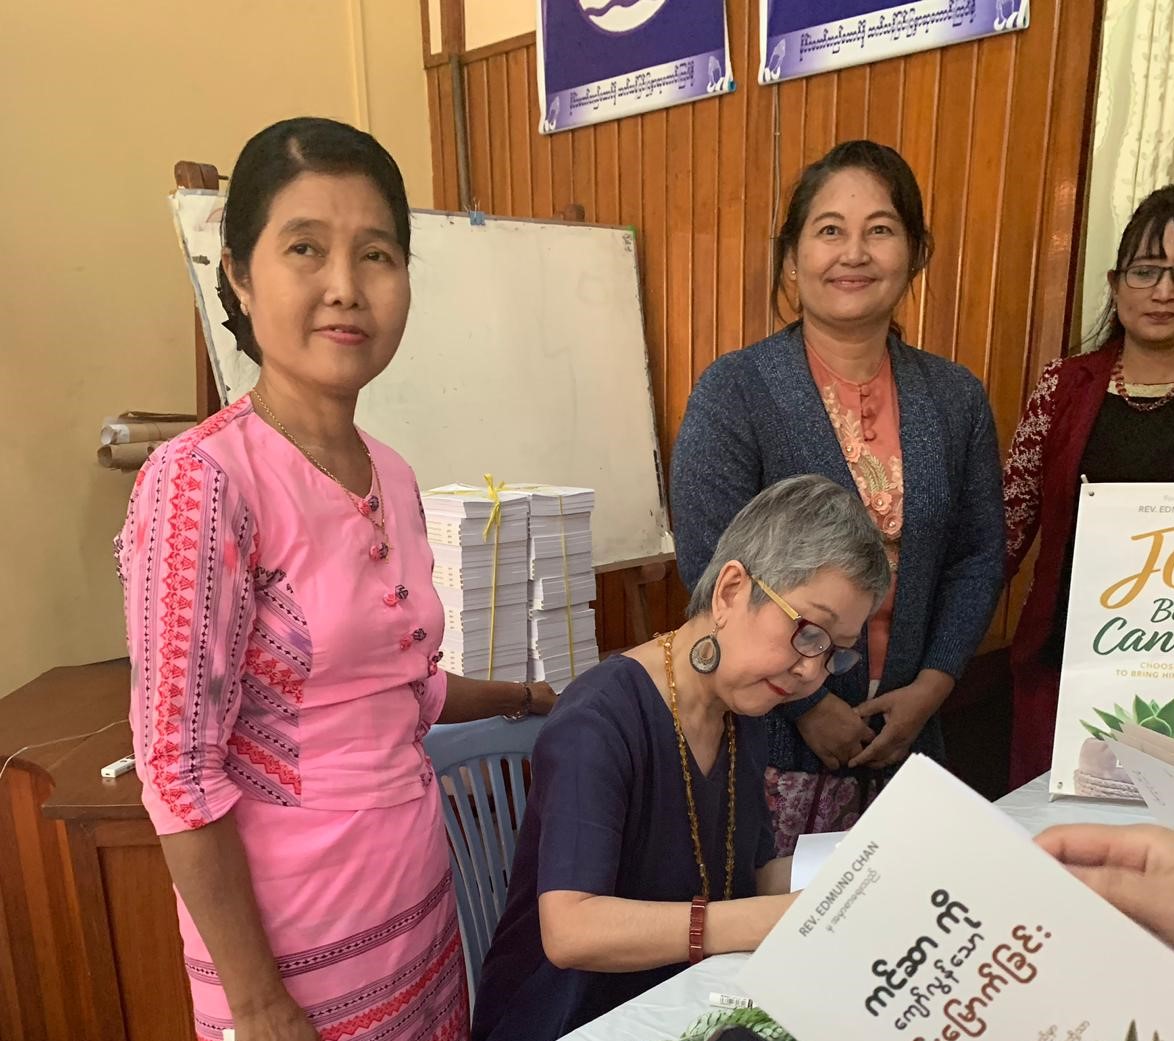 Lim's first book was translated into Burmese so readers in Myanmar can be encouraged by her story.